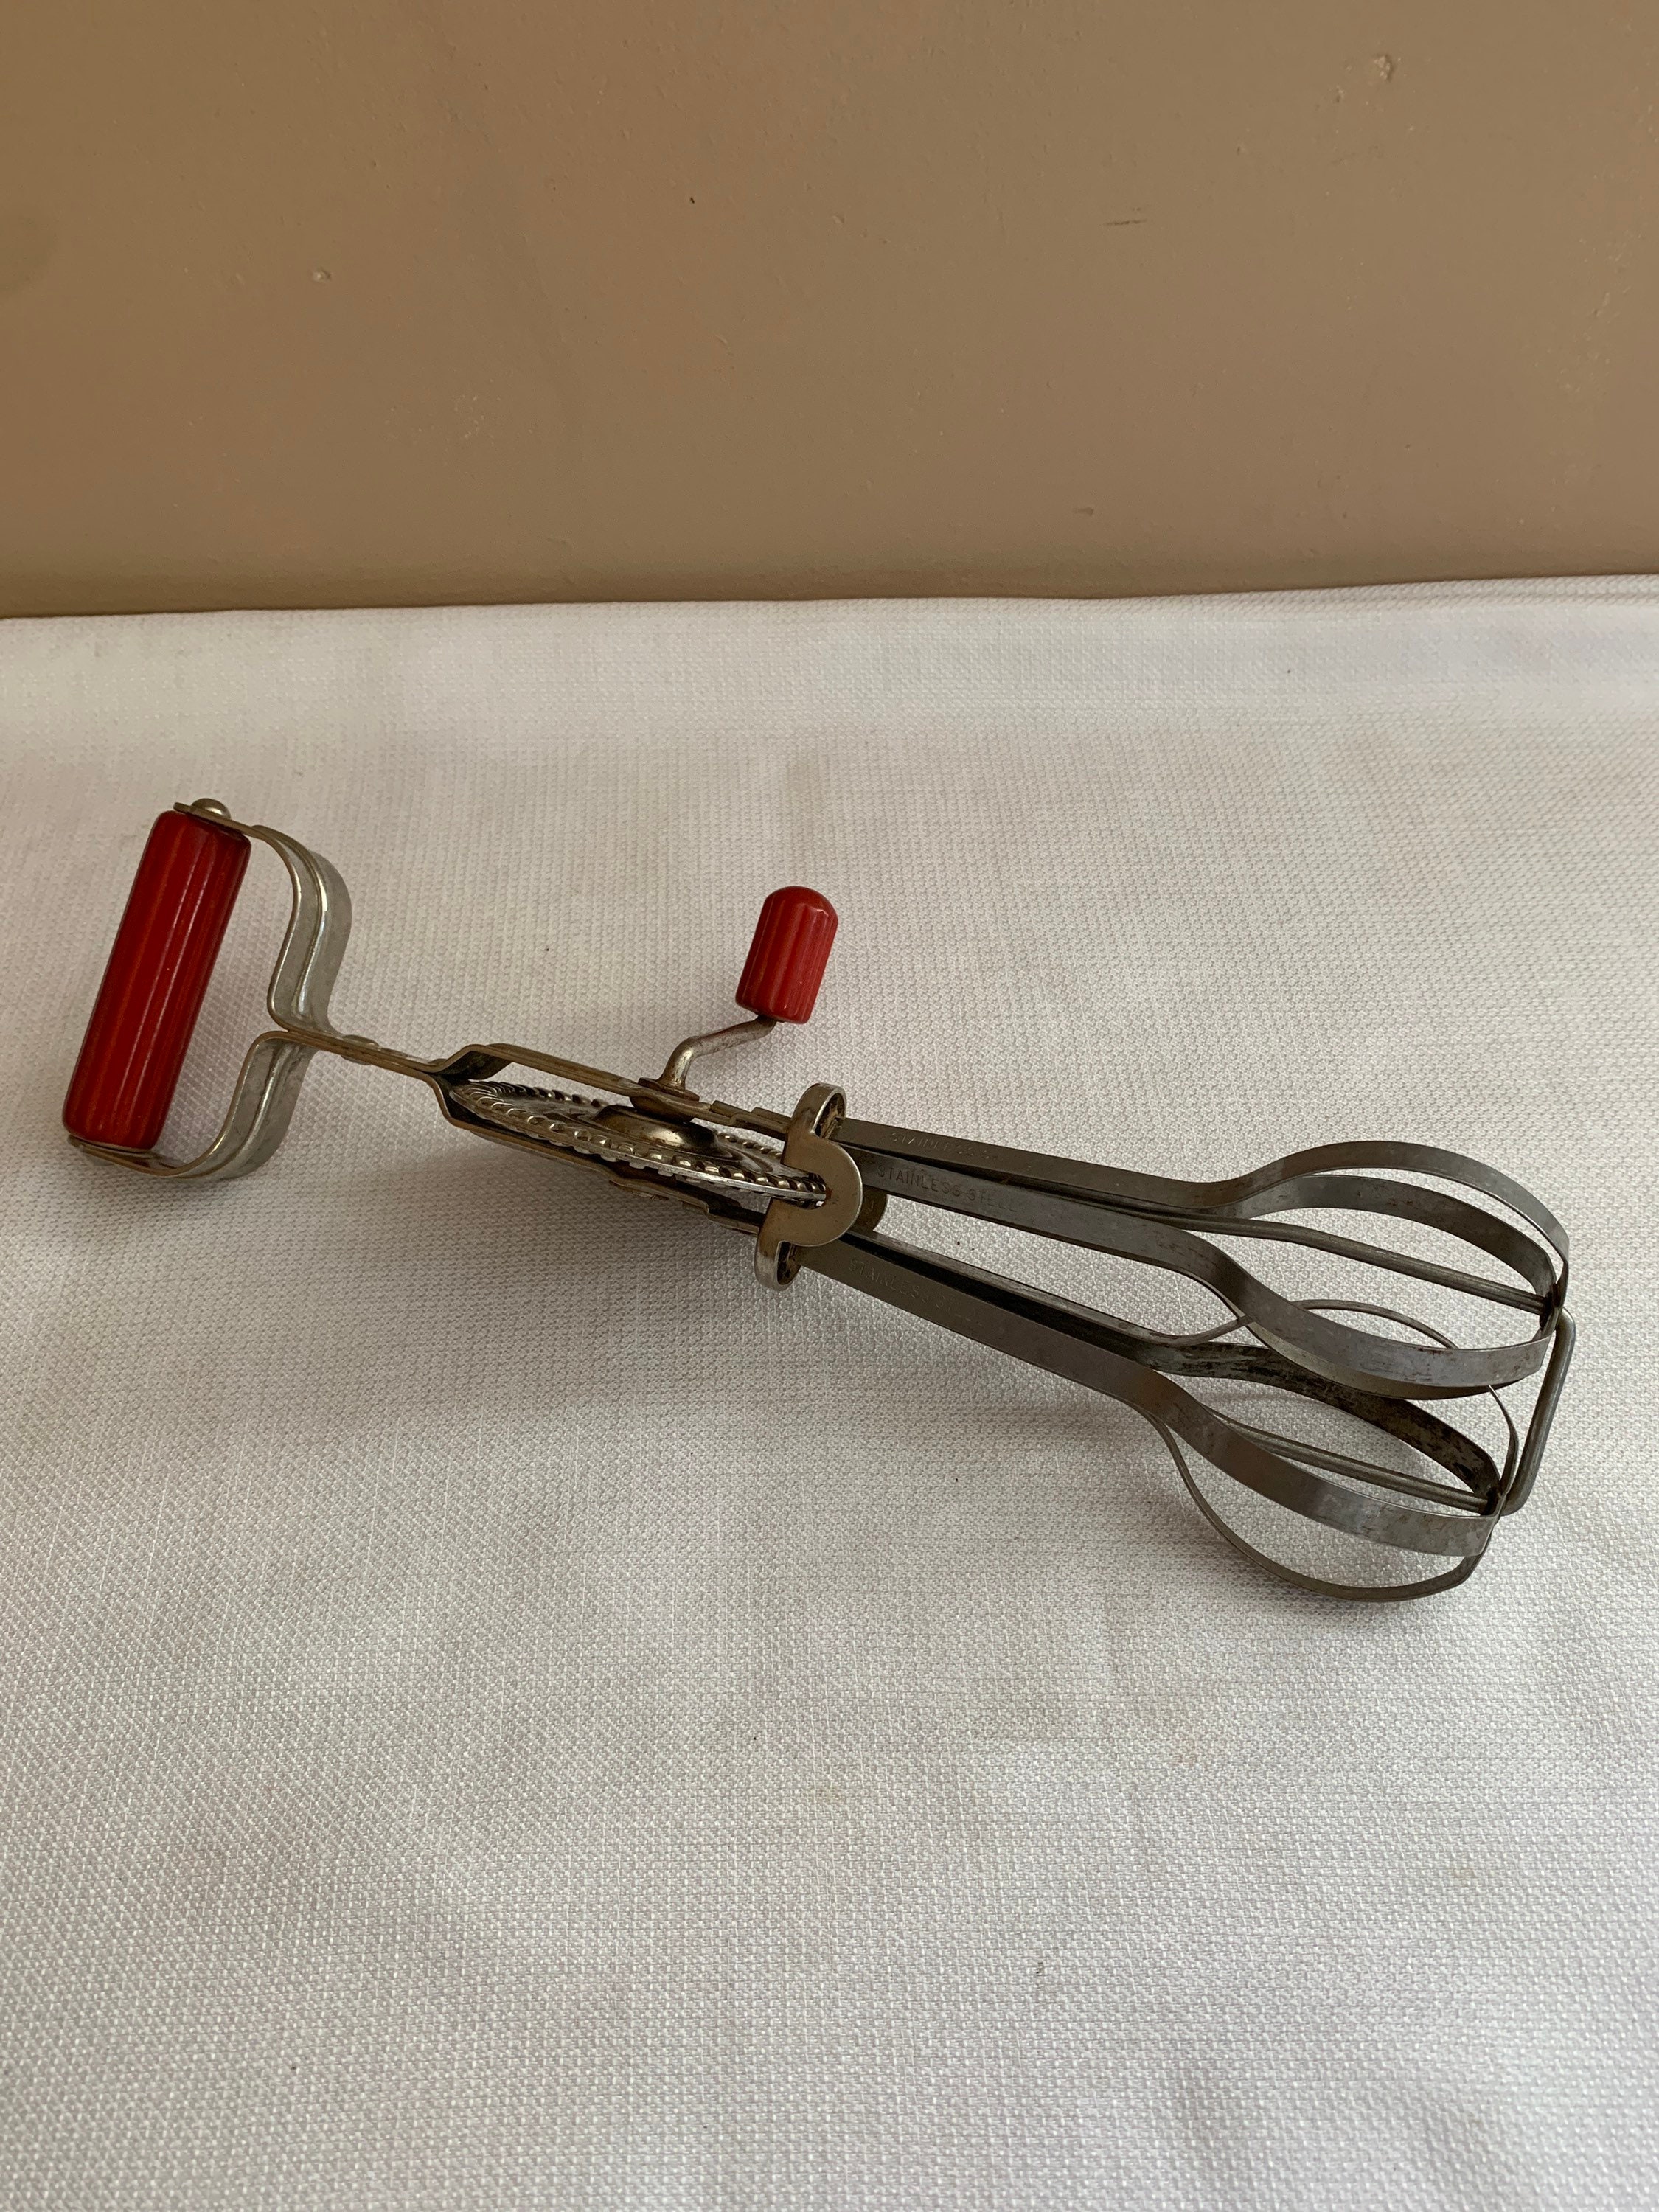 Vintage Mixer Whisk Maid of Honor Vintage Present EKOO, Red Kitchenware,  Wood, Androck Egg Beater, Hand Mixer, Hand Crank 